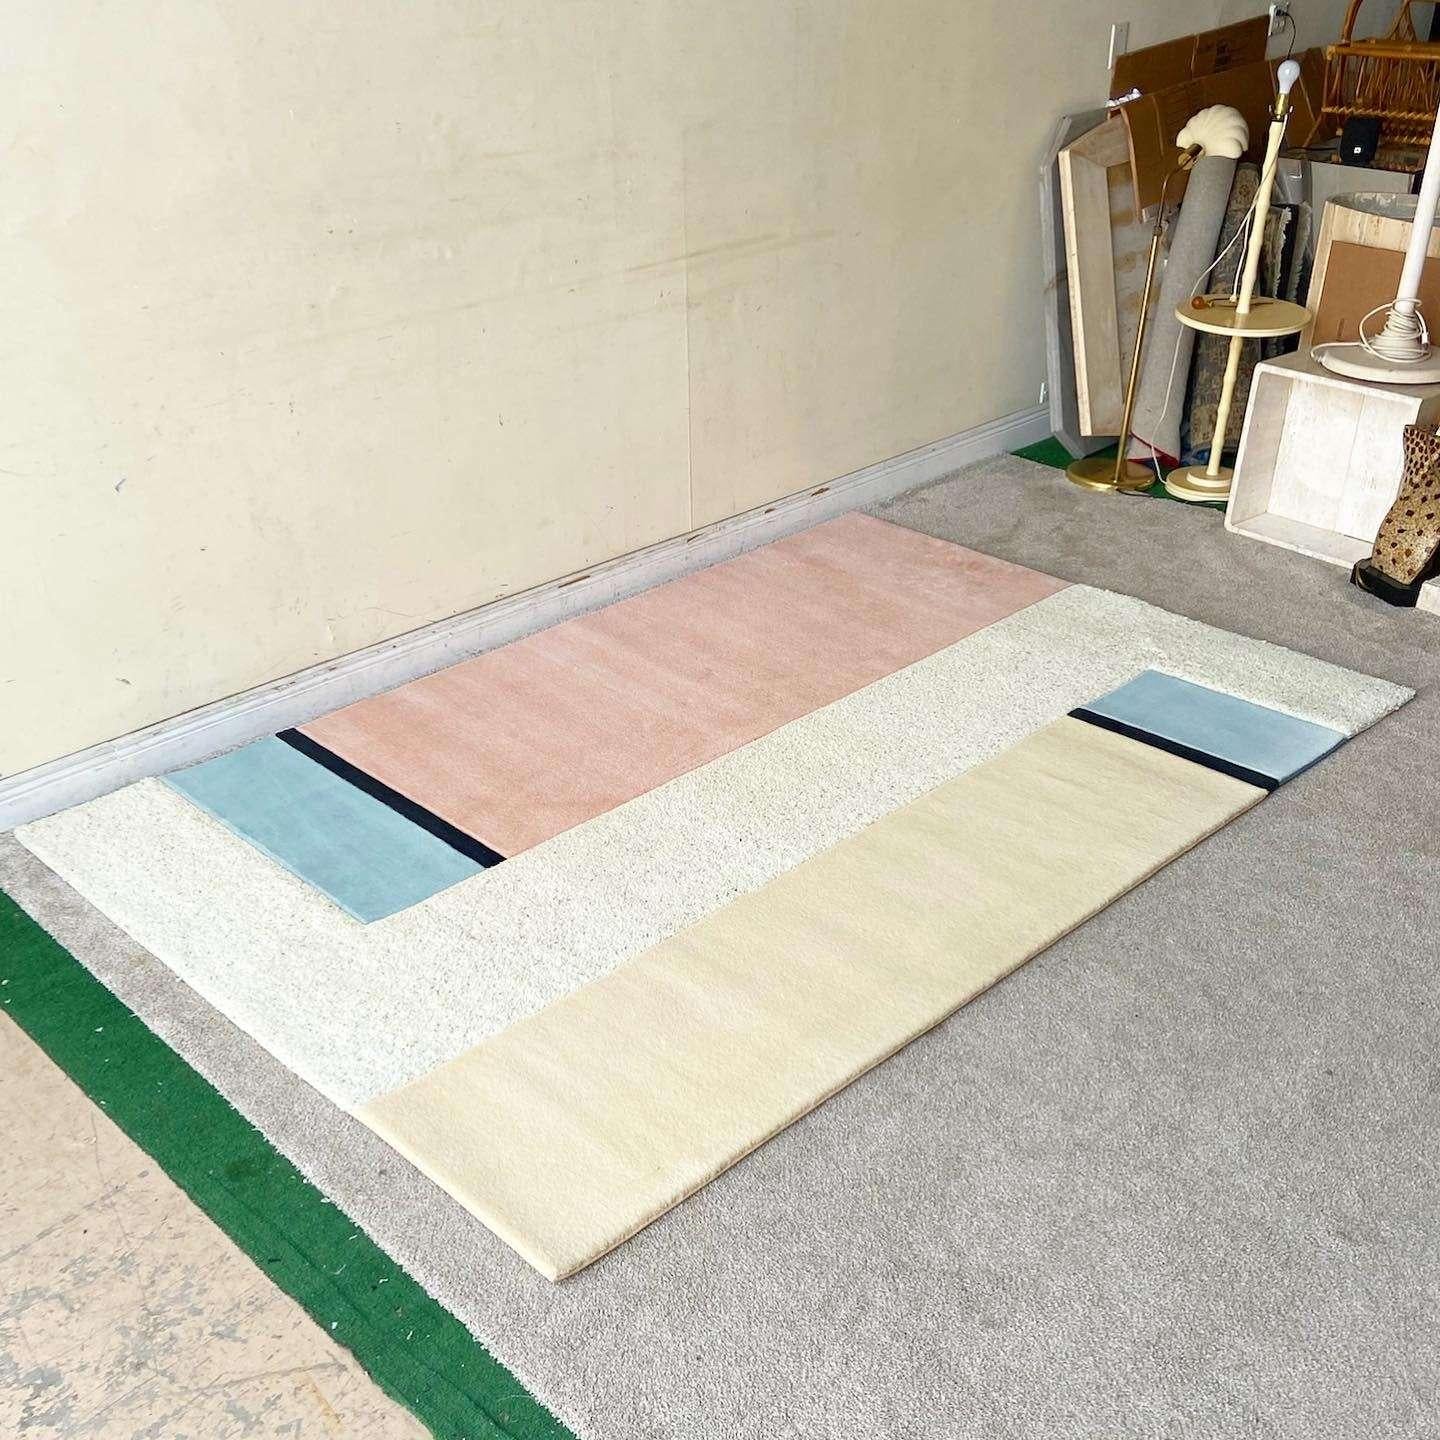 Amazing vintage postmodern rectangular area rug. The carpet is comprised of beige, pink, blue and black rectangles with a shaggy beige center.

Rug 25
